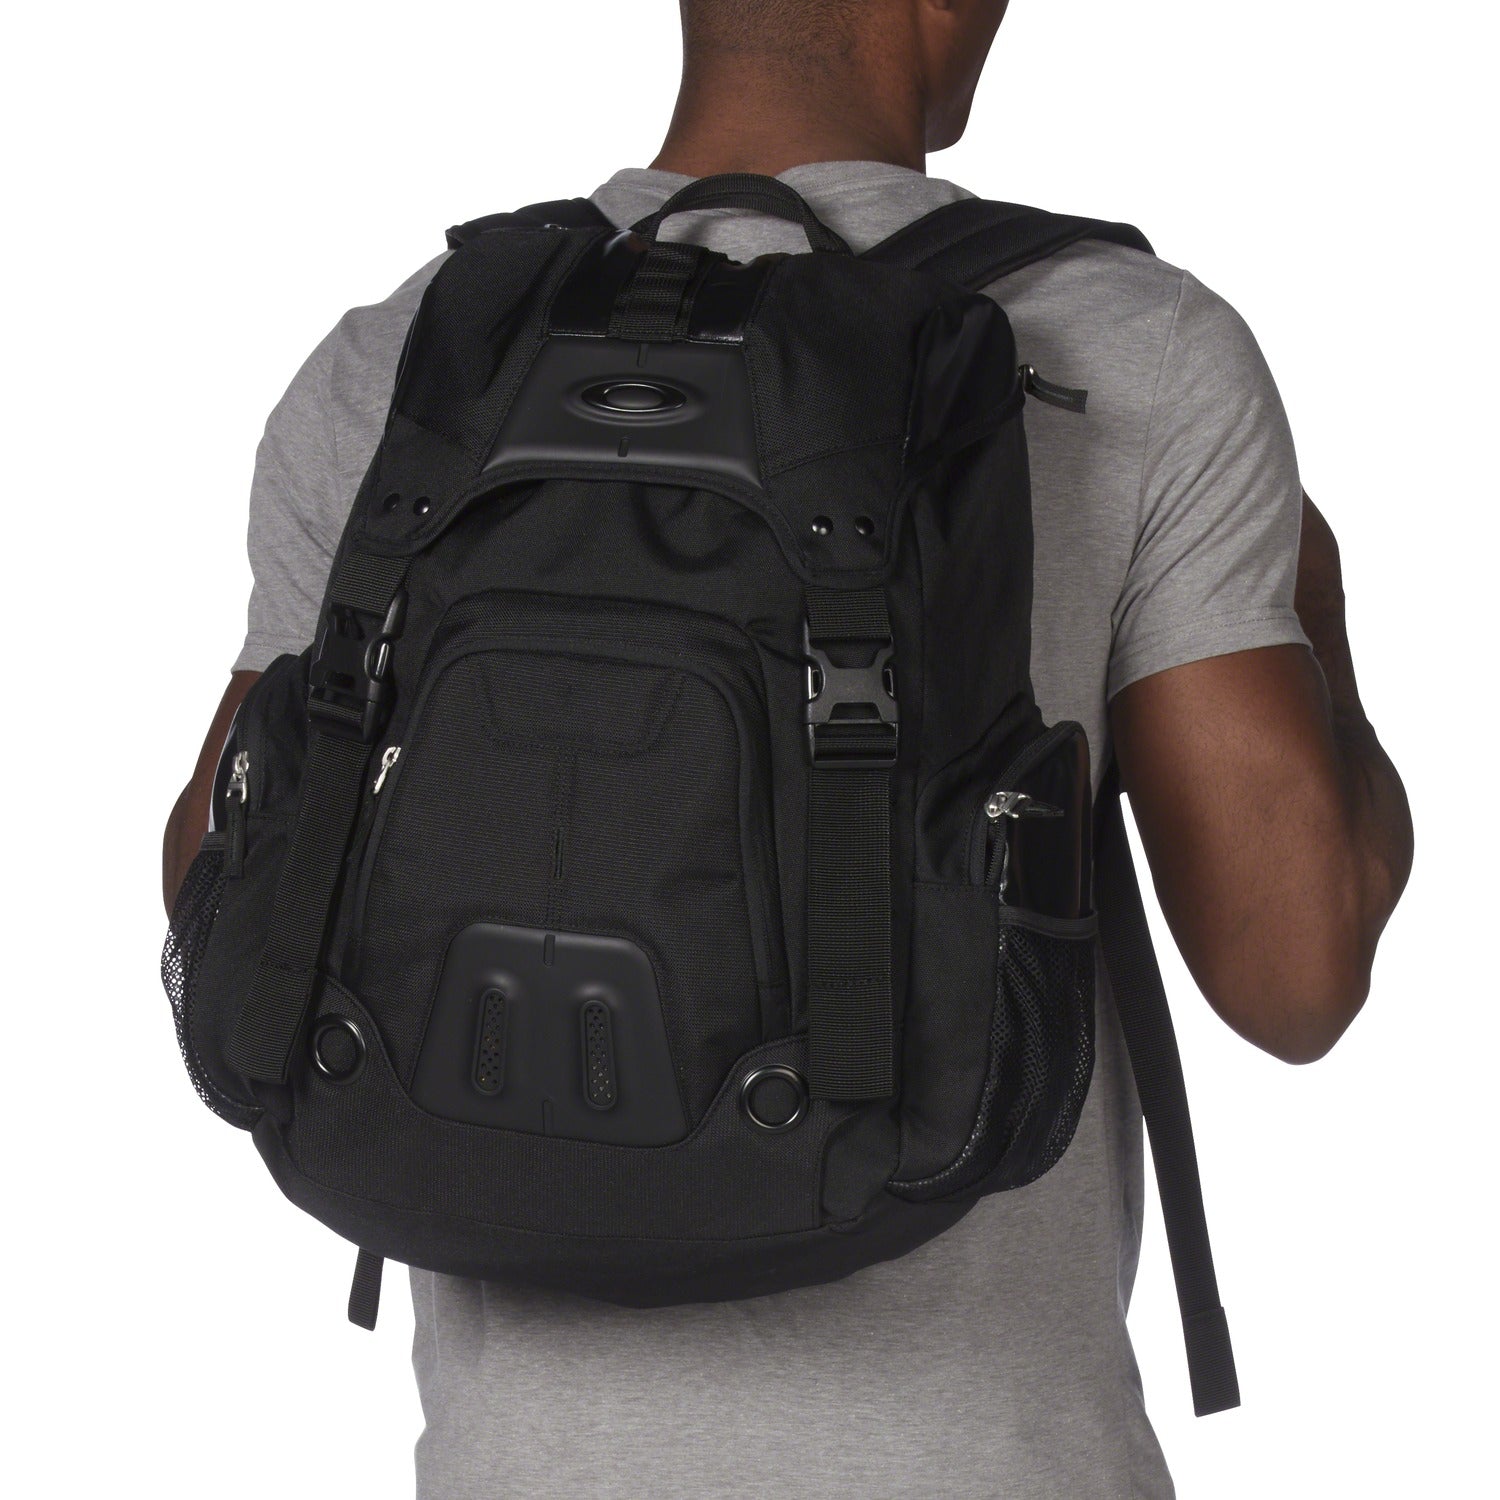 Top Rated Oakley backpacks